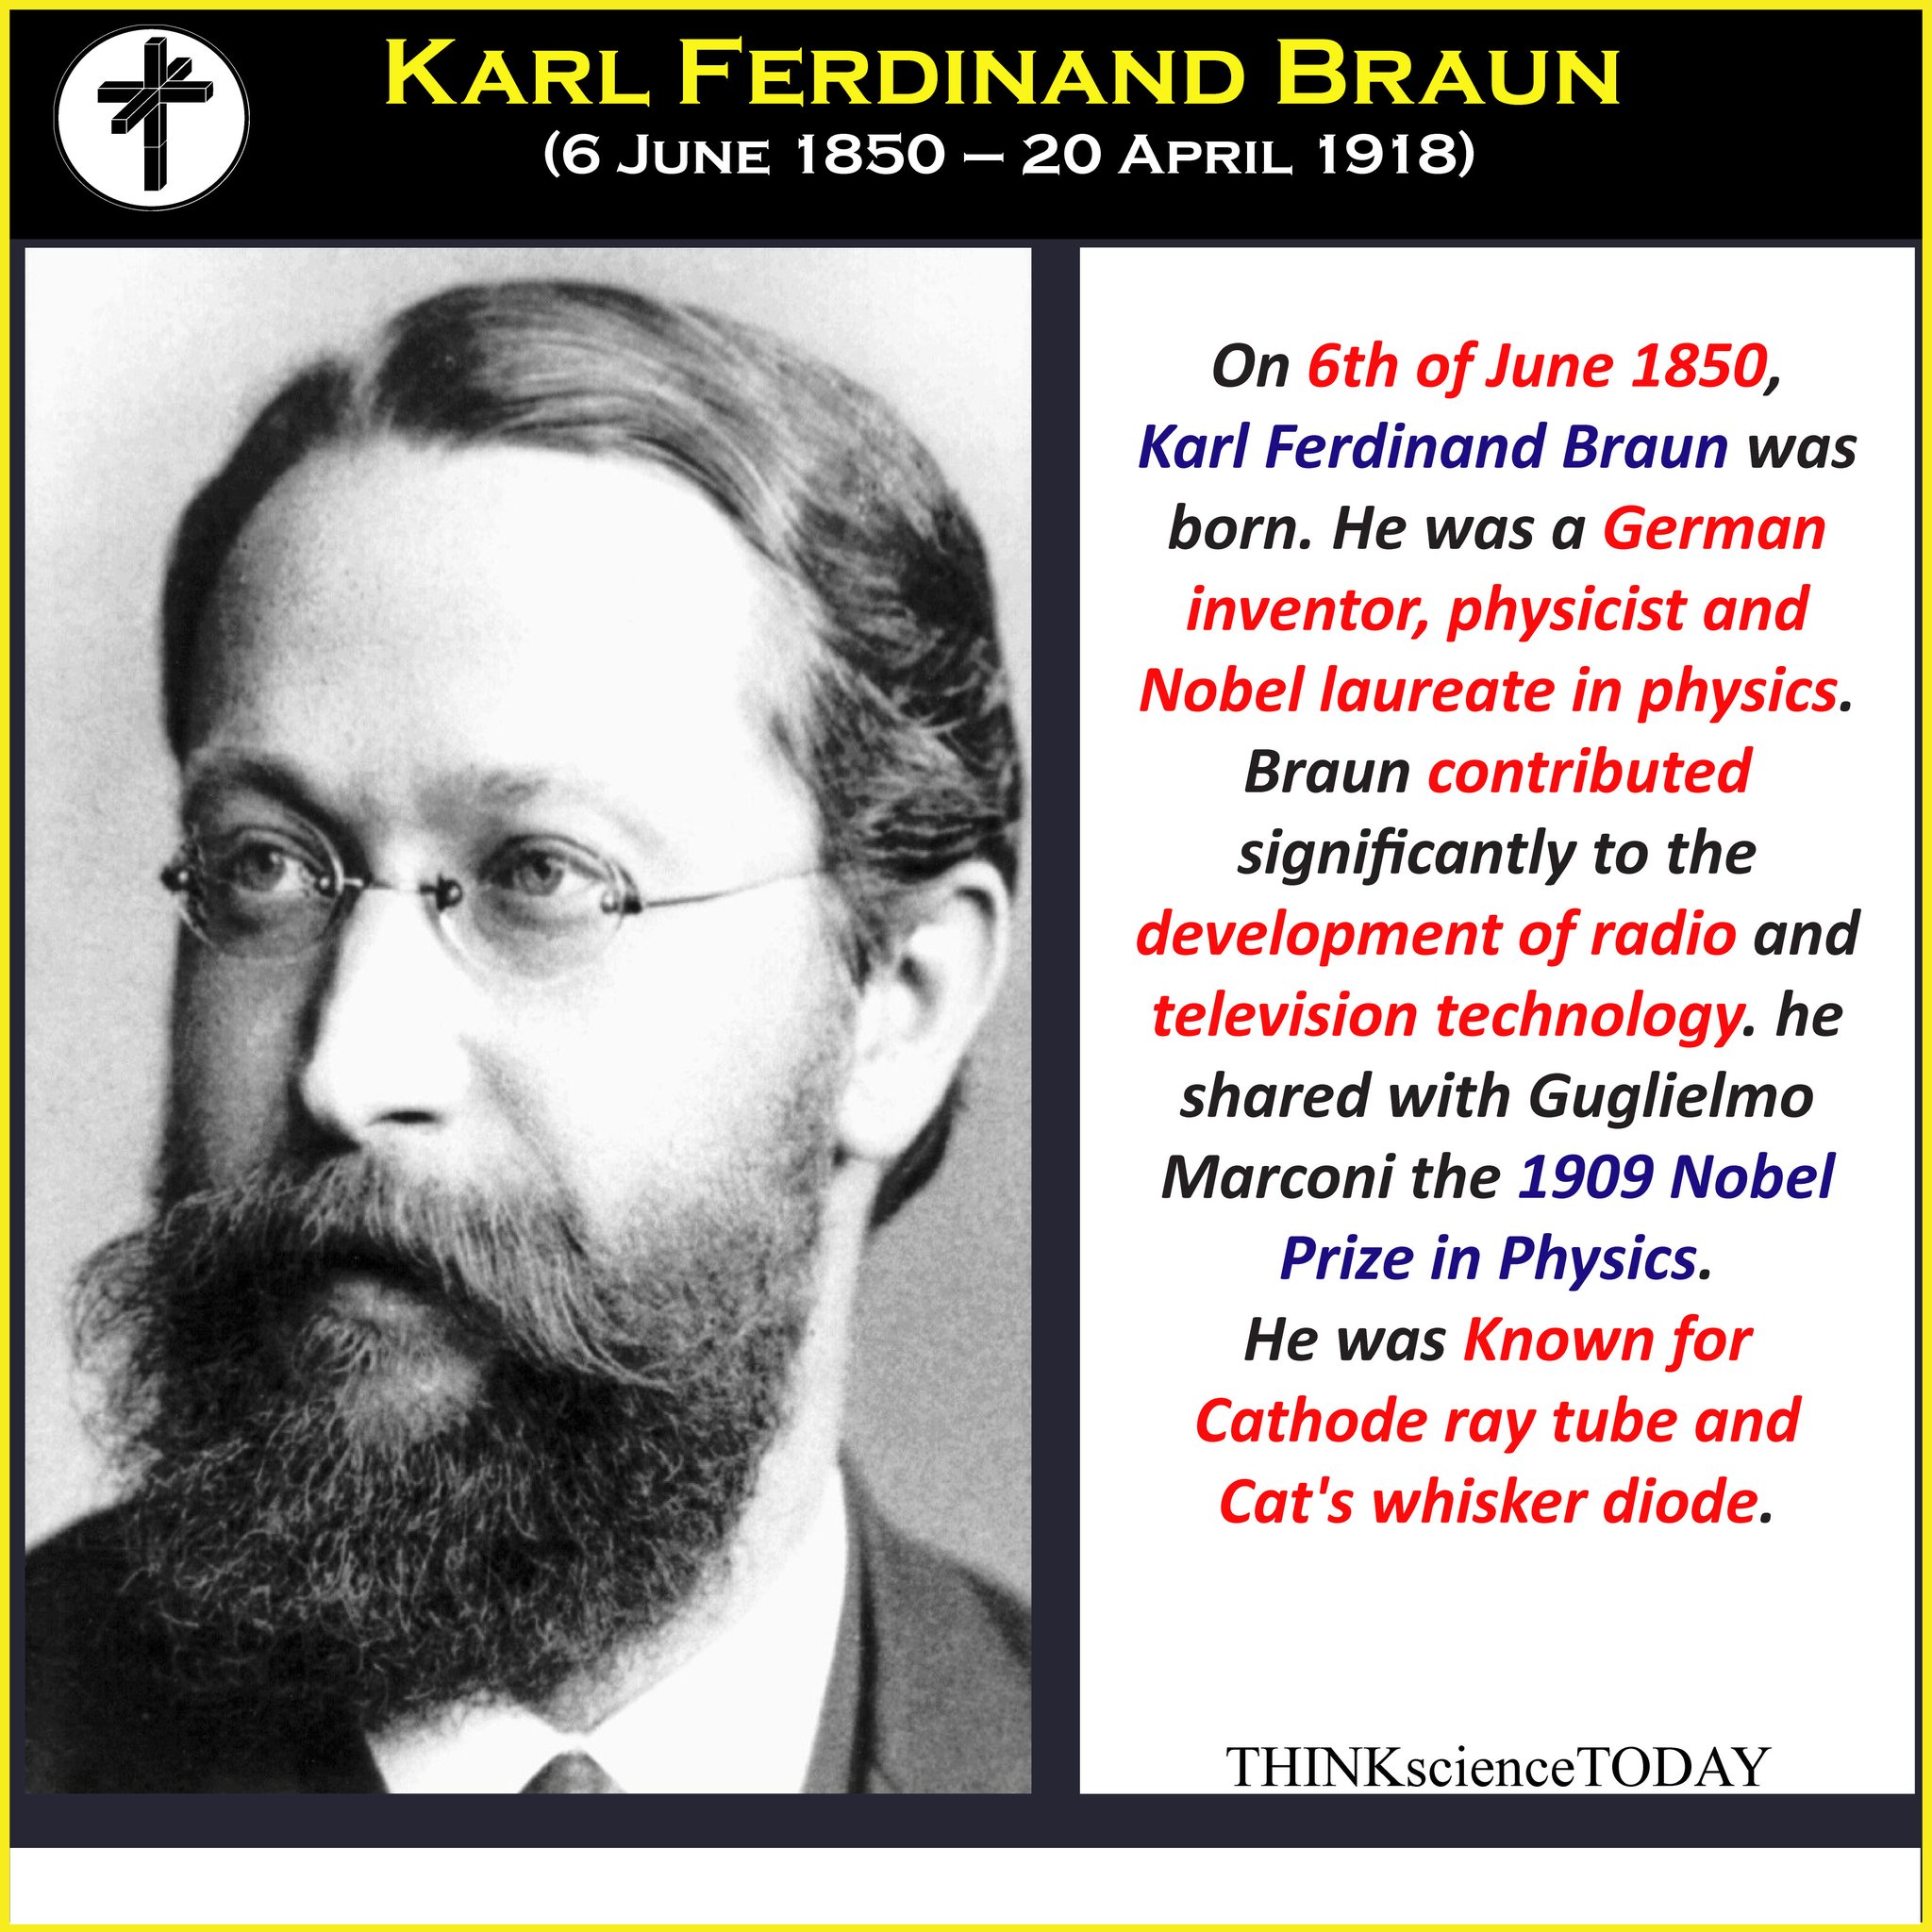 THINKscienceTODAY Twitterren: "Today on 6th of June 1850, Karl Ferdinand Braun was born. He was a #German #inventor, #Physicist and Nobel laureate in physics. Braun contributed significantly to the development of radio